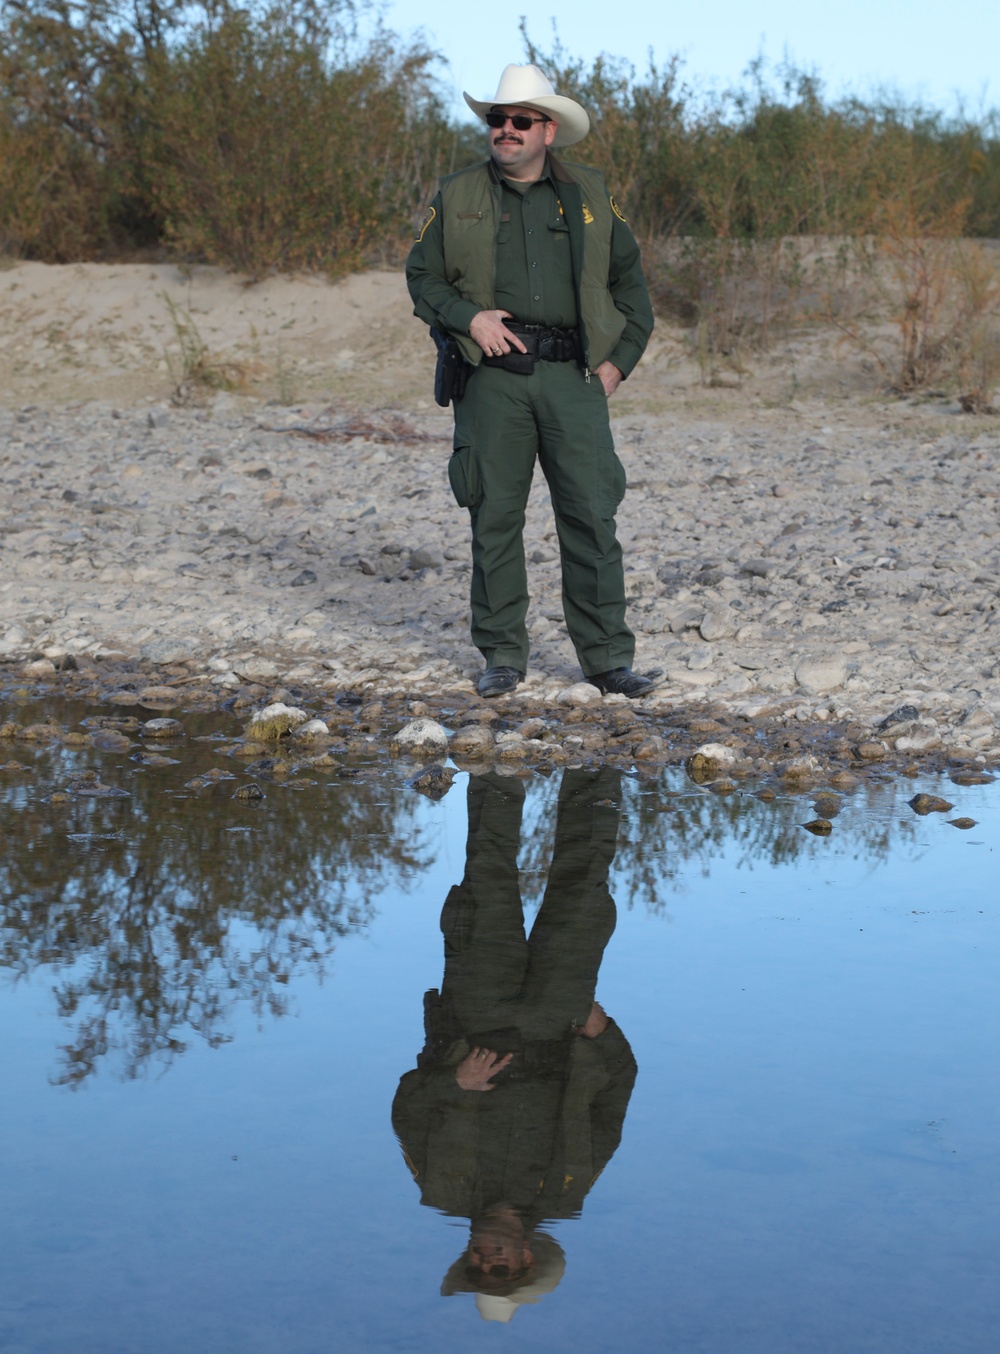 Border Patrol Agent conducts foot patrol in Big Bend National Park, Texas